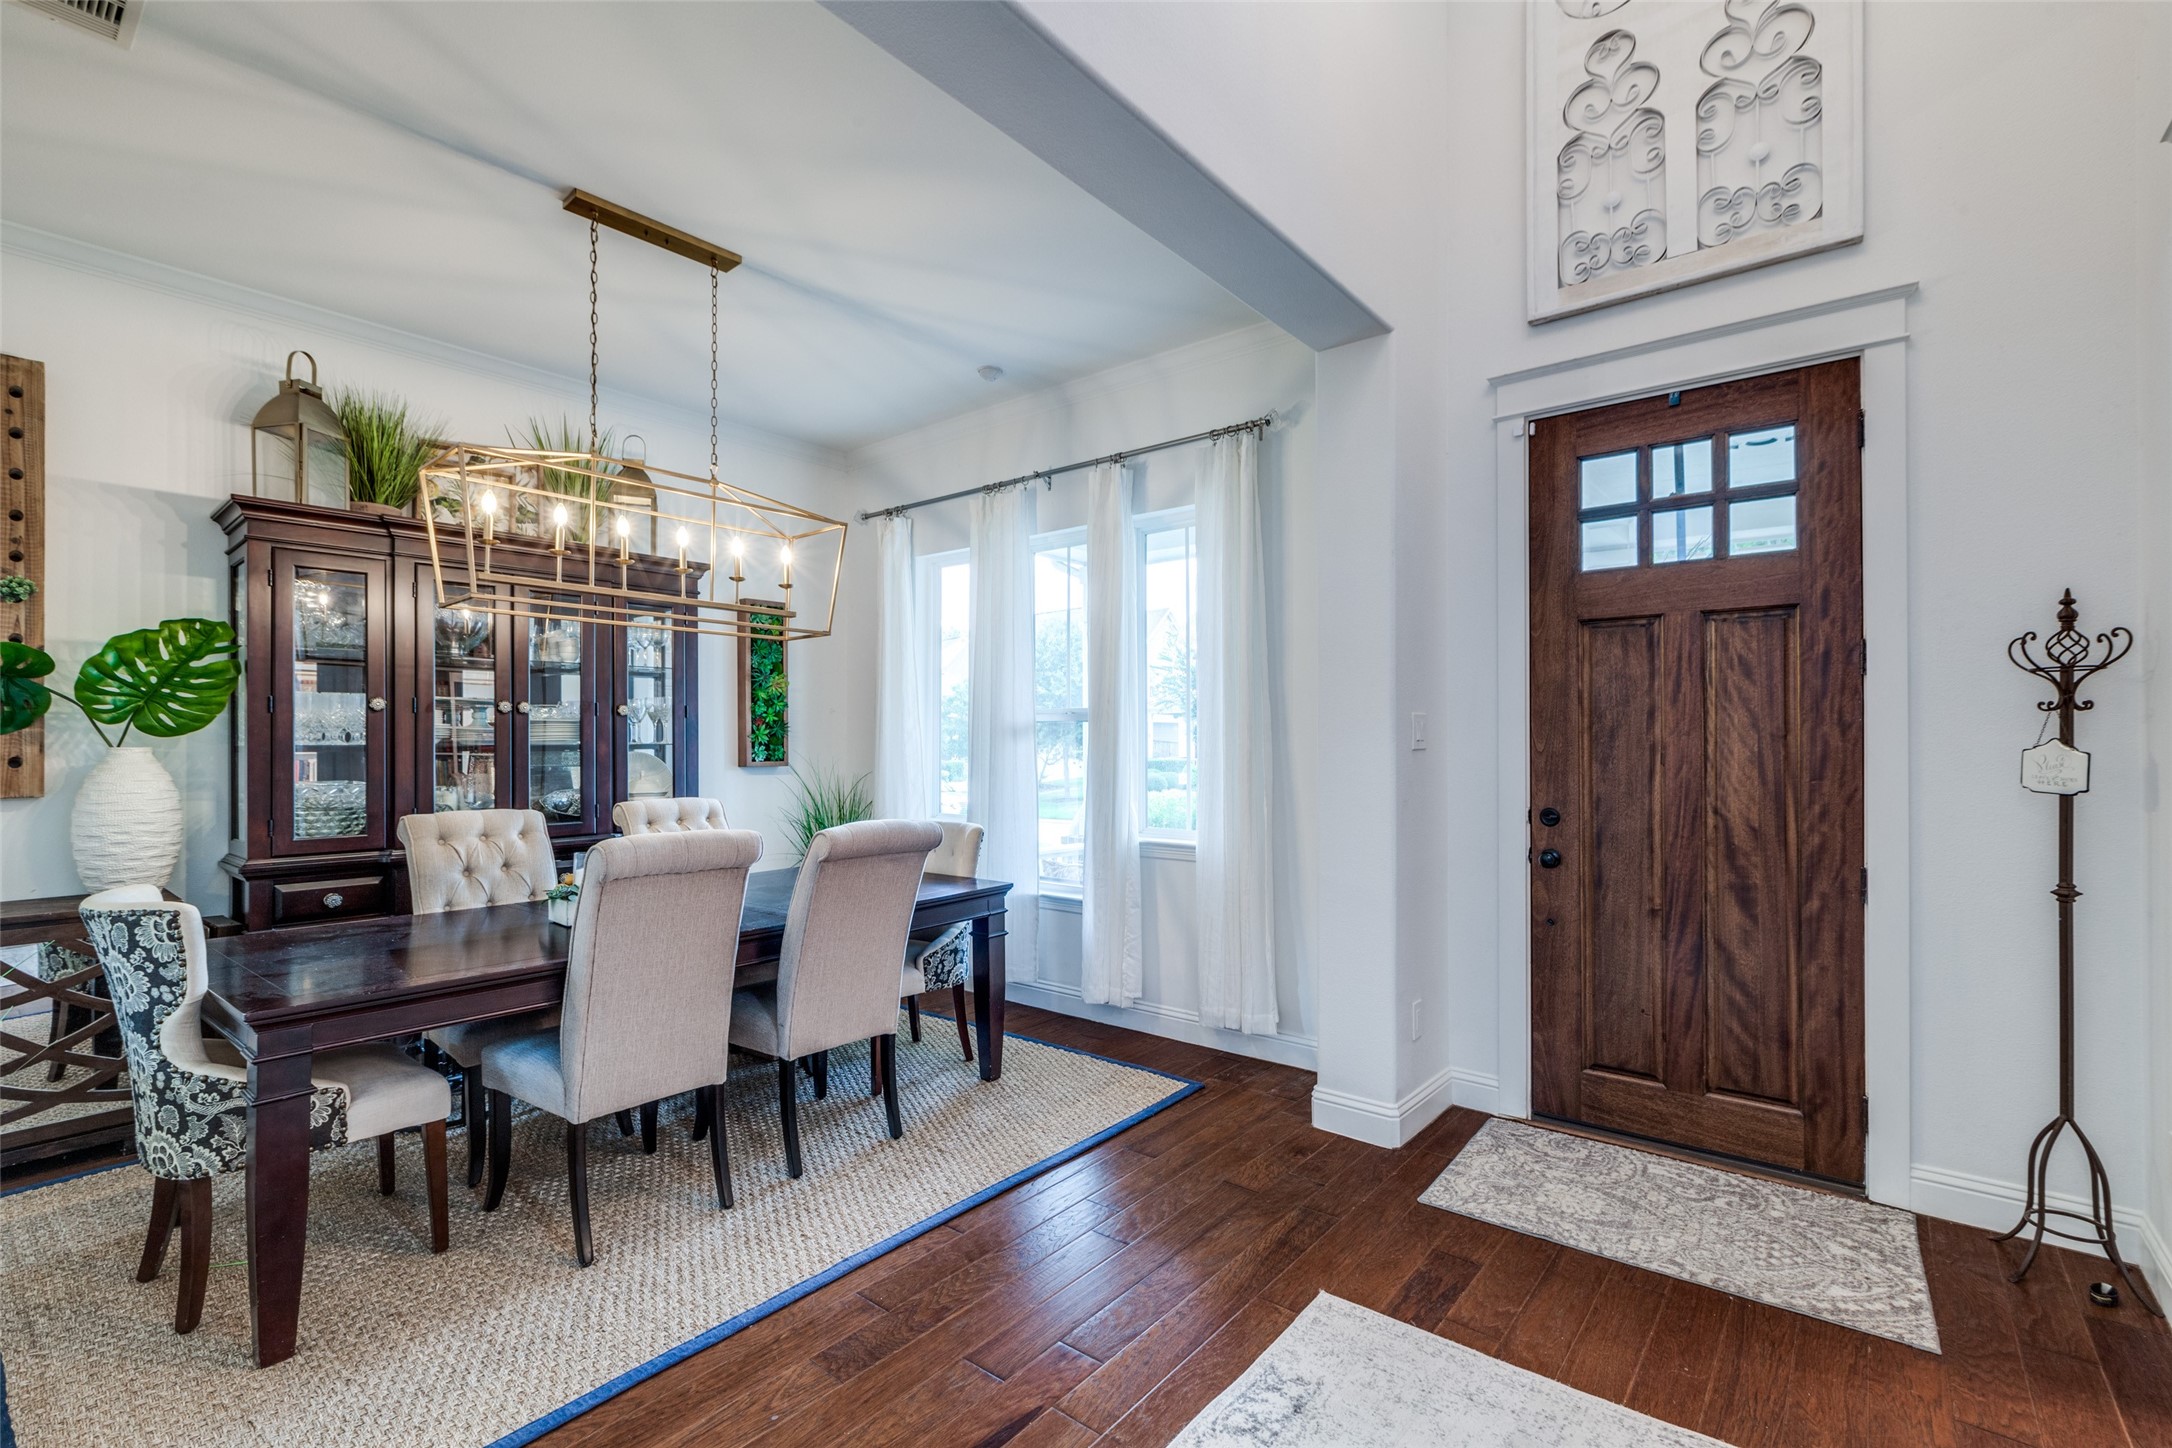 You will love entertaining in this formal dining room.